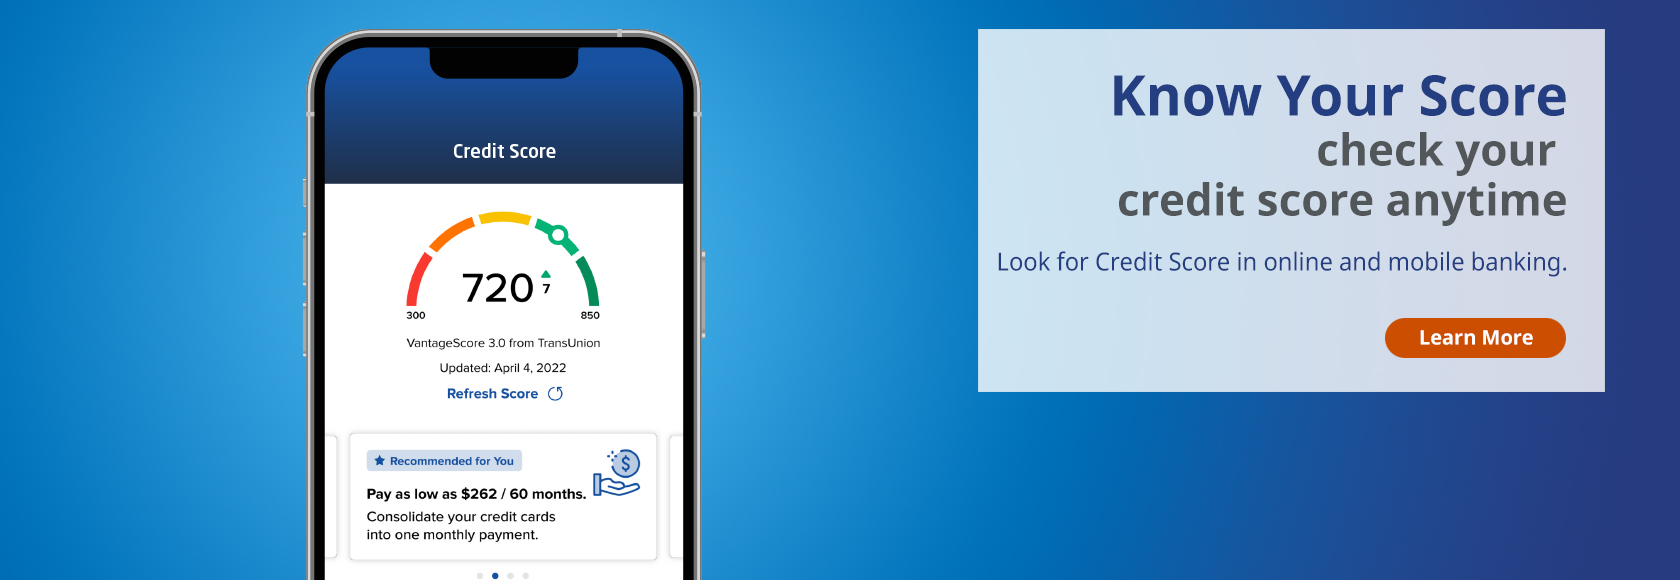 Know your credit score.  Check your credit score at any time.  Look for credit score in online and mobile banking.  Learn more